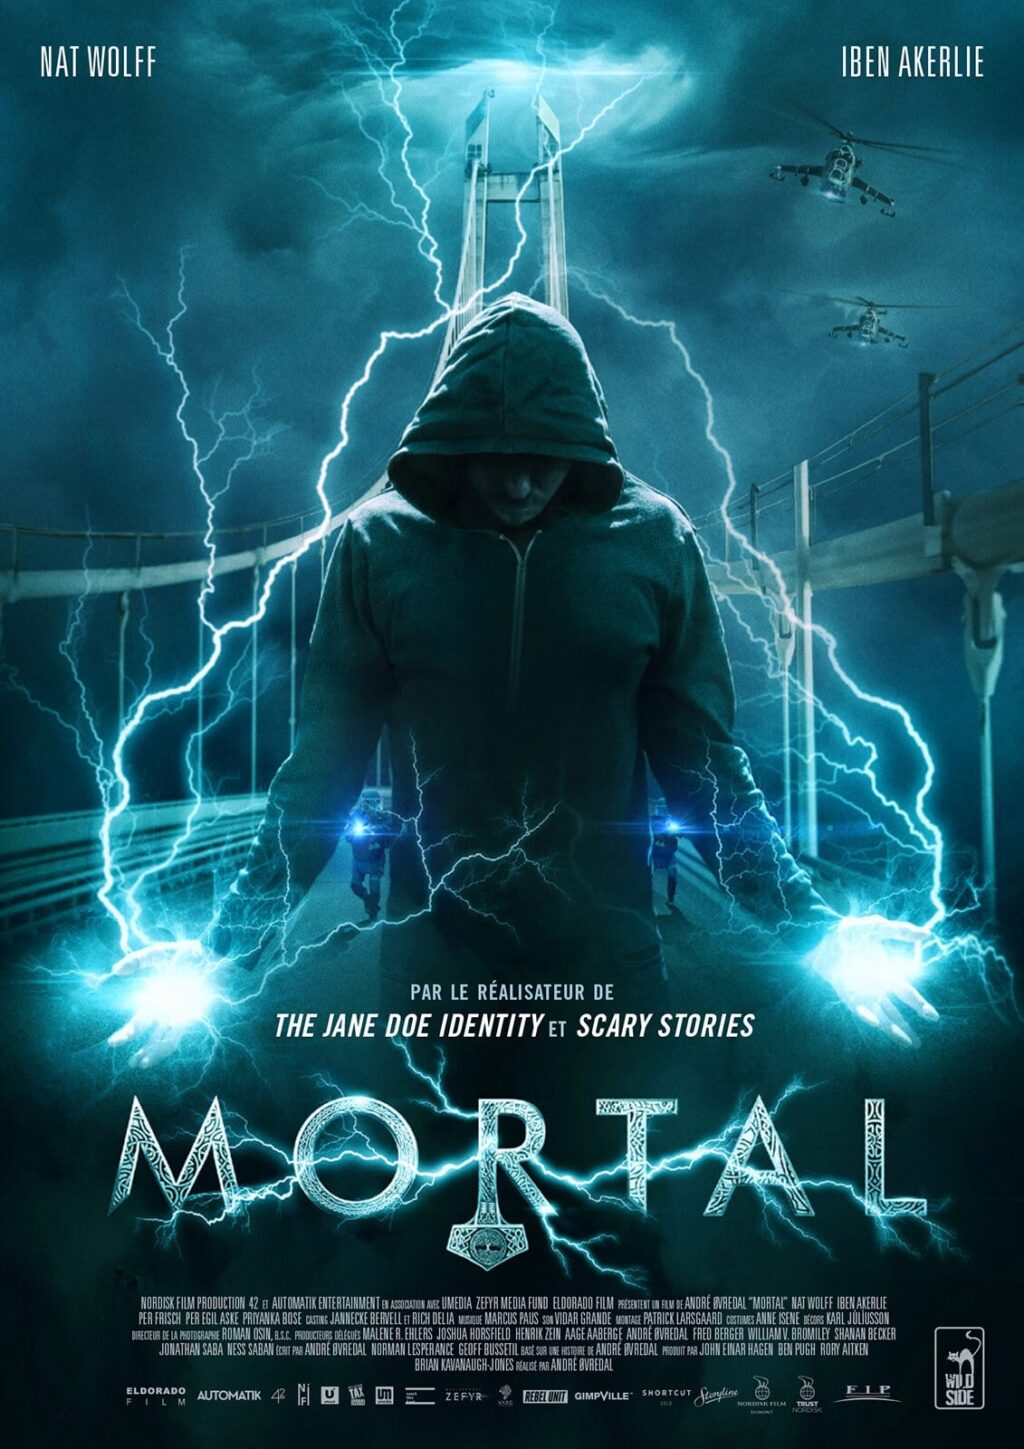 Poster for the movie "Mortal"